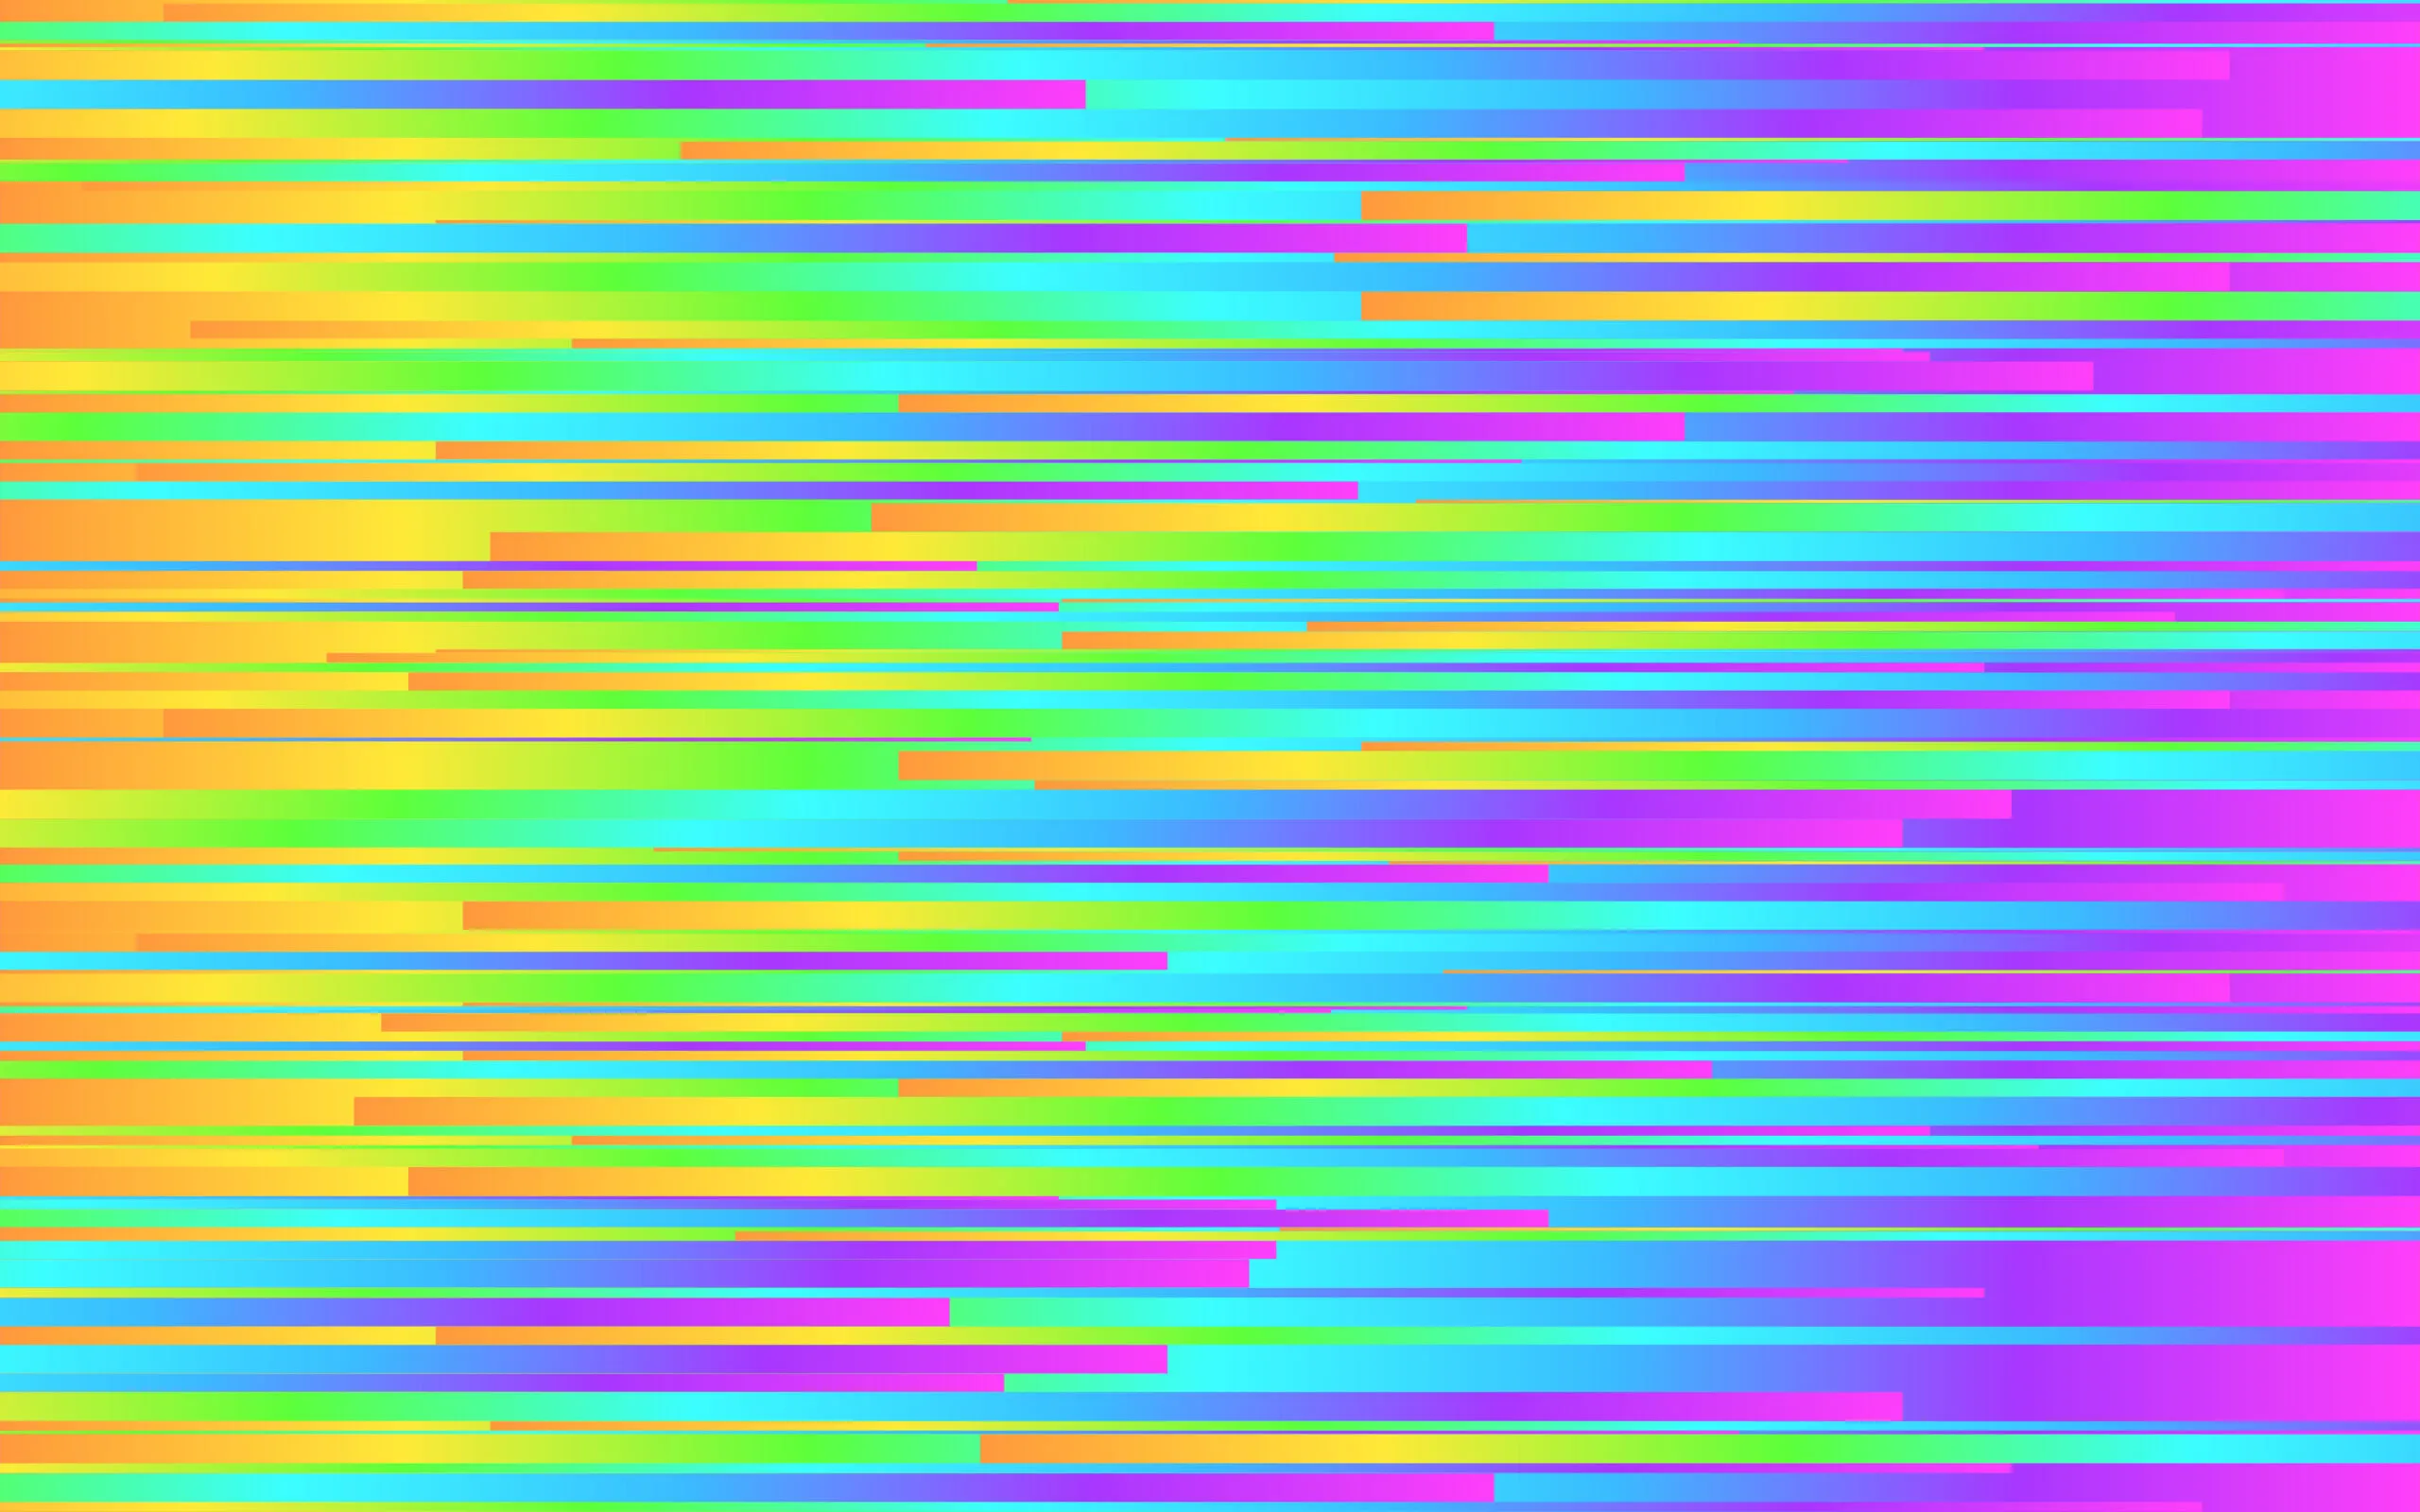 Randomly Generated Image of Geometric Shapes and Colors